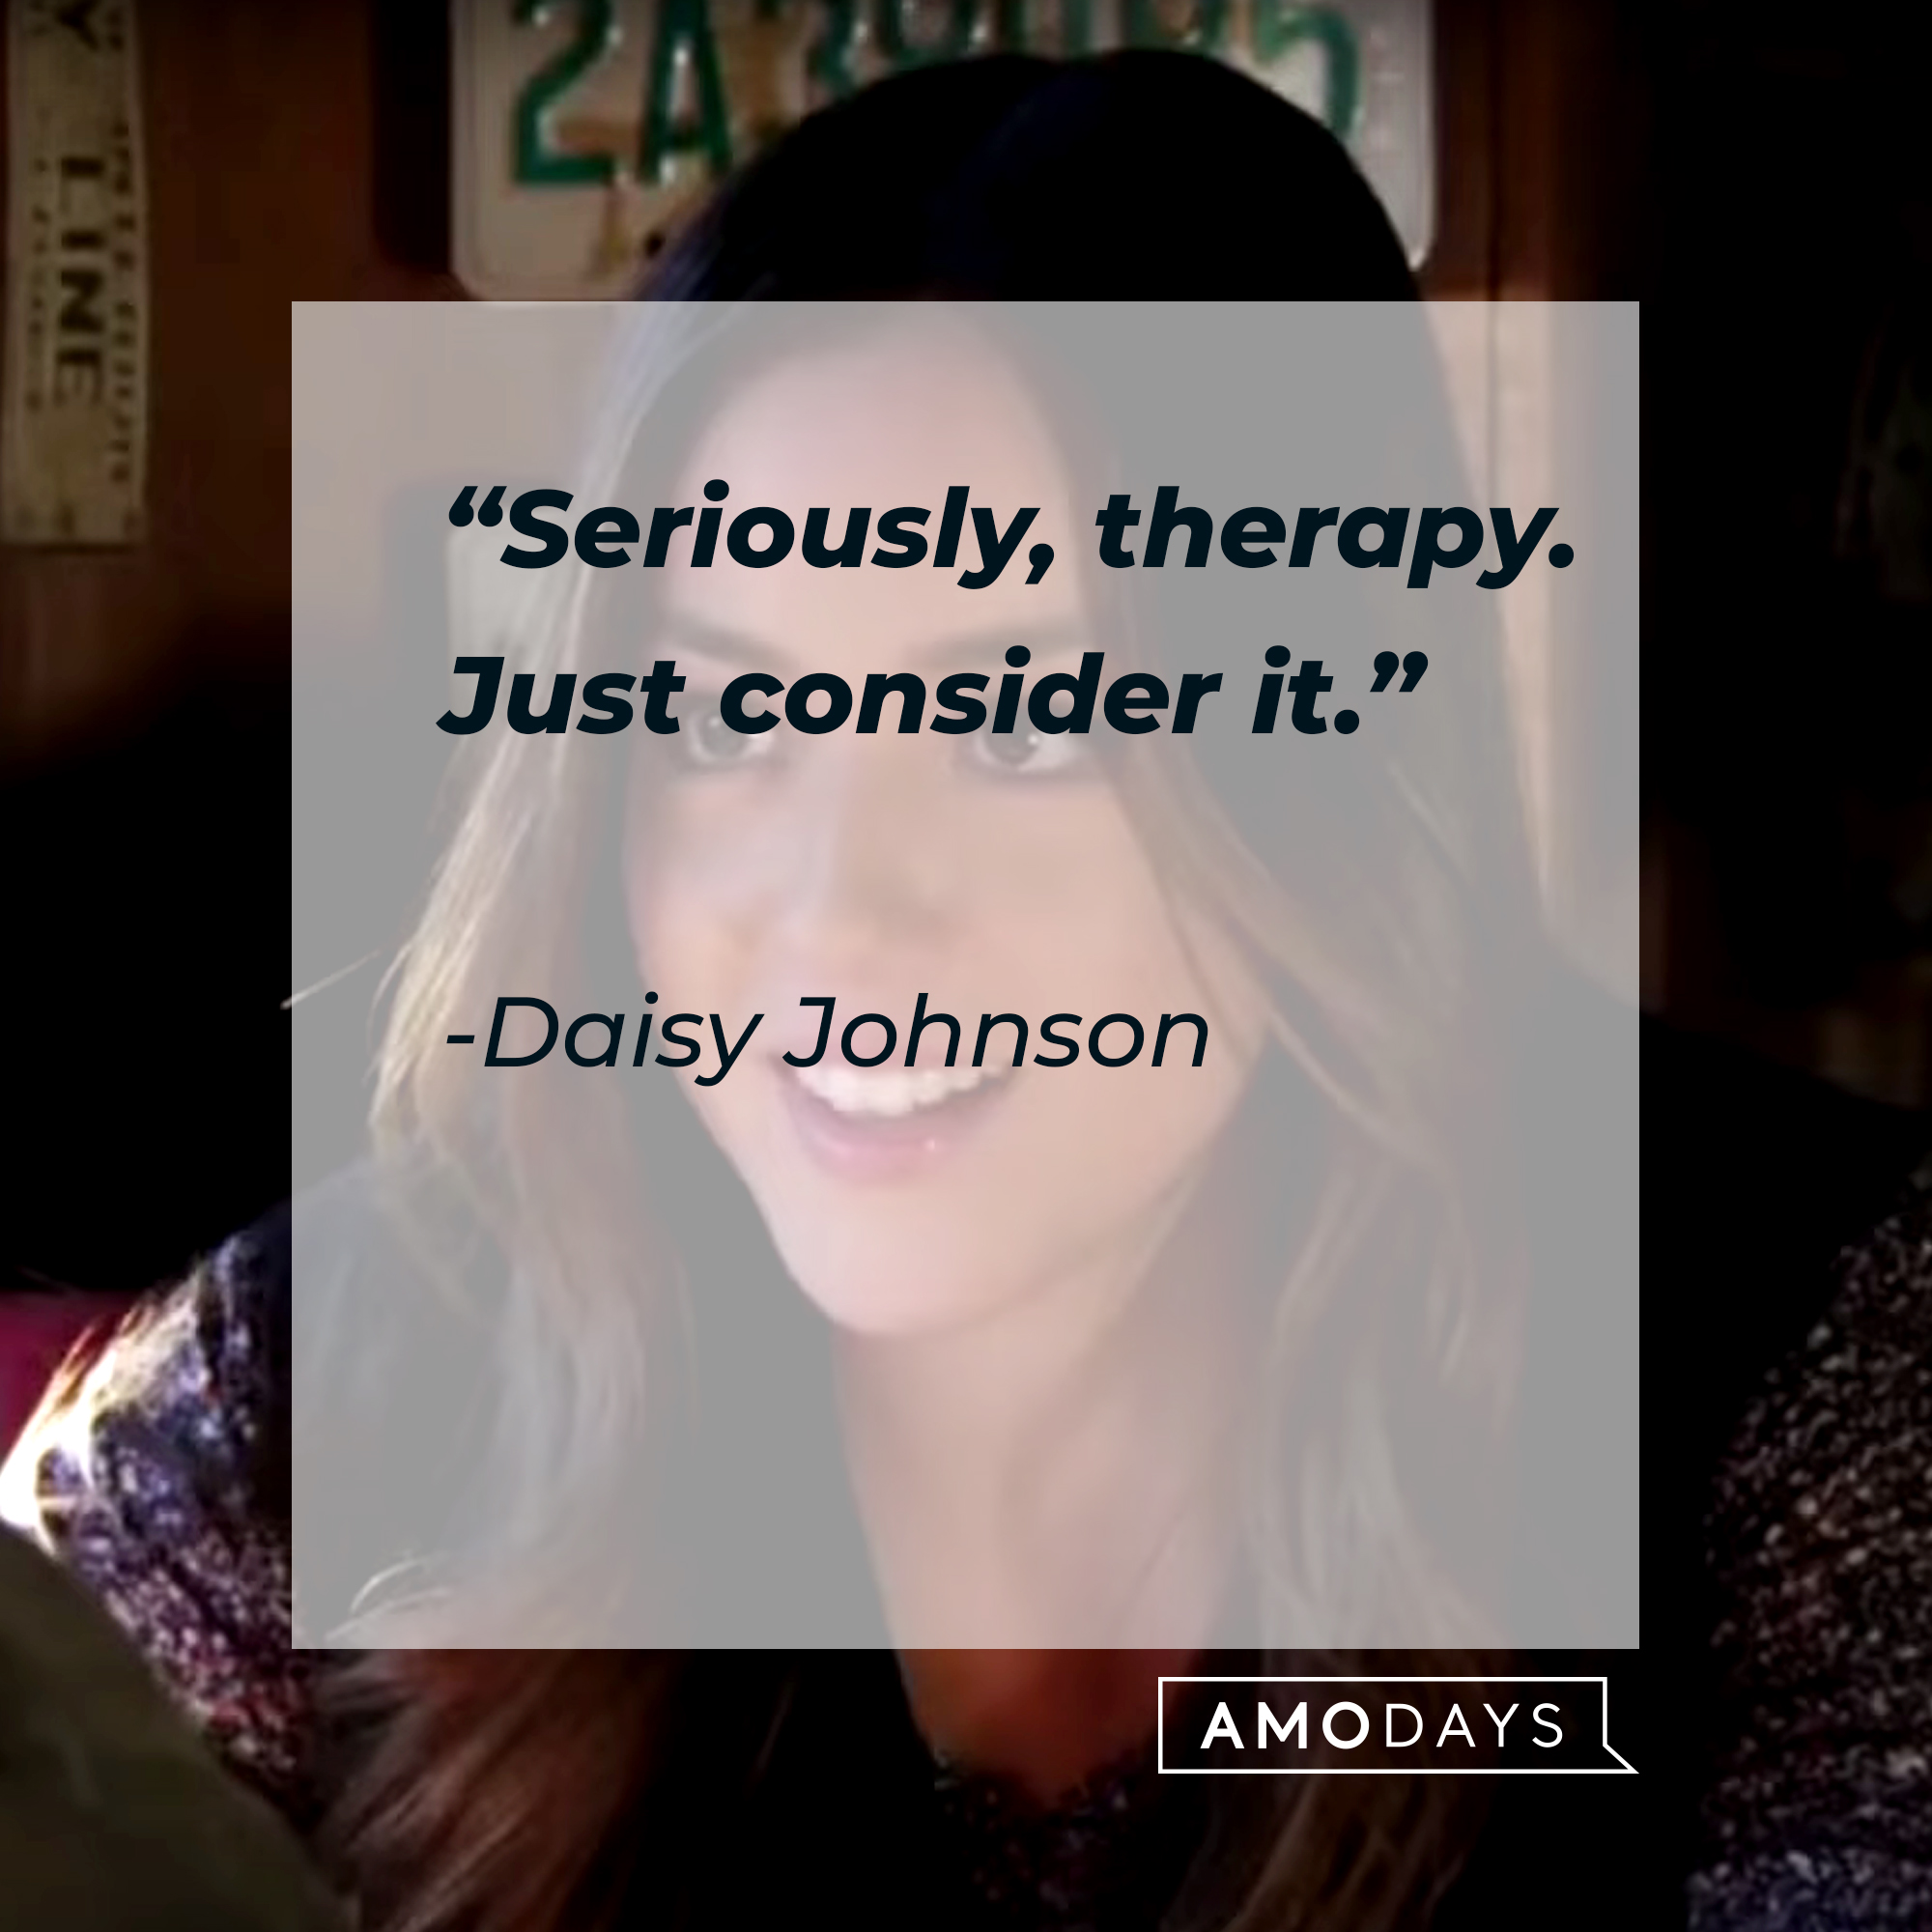 Daisy Johnson, with her quote: "Seriously, therapy. Just consider It." | Source: Facebook.com/AgentsofShield